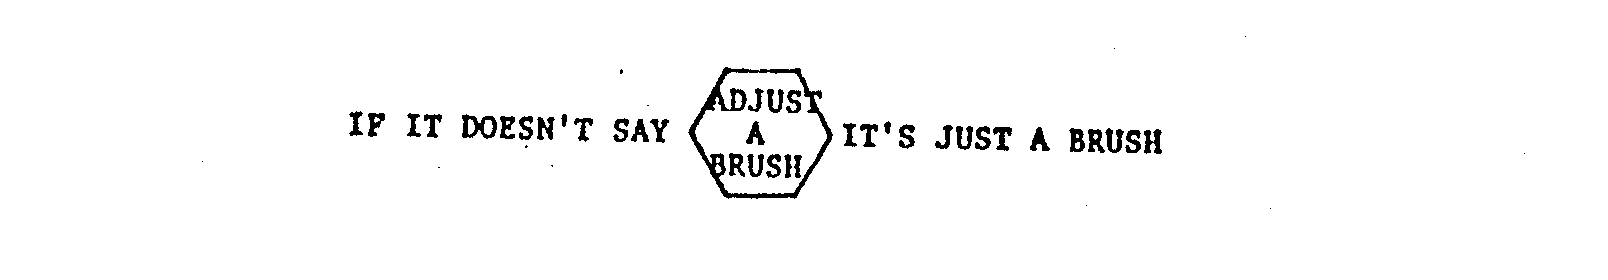 Trademark Logo IF IT DOESN'T SAY ADJUST A BRUSH IT'S JUST A BRUSH